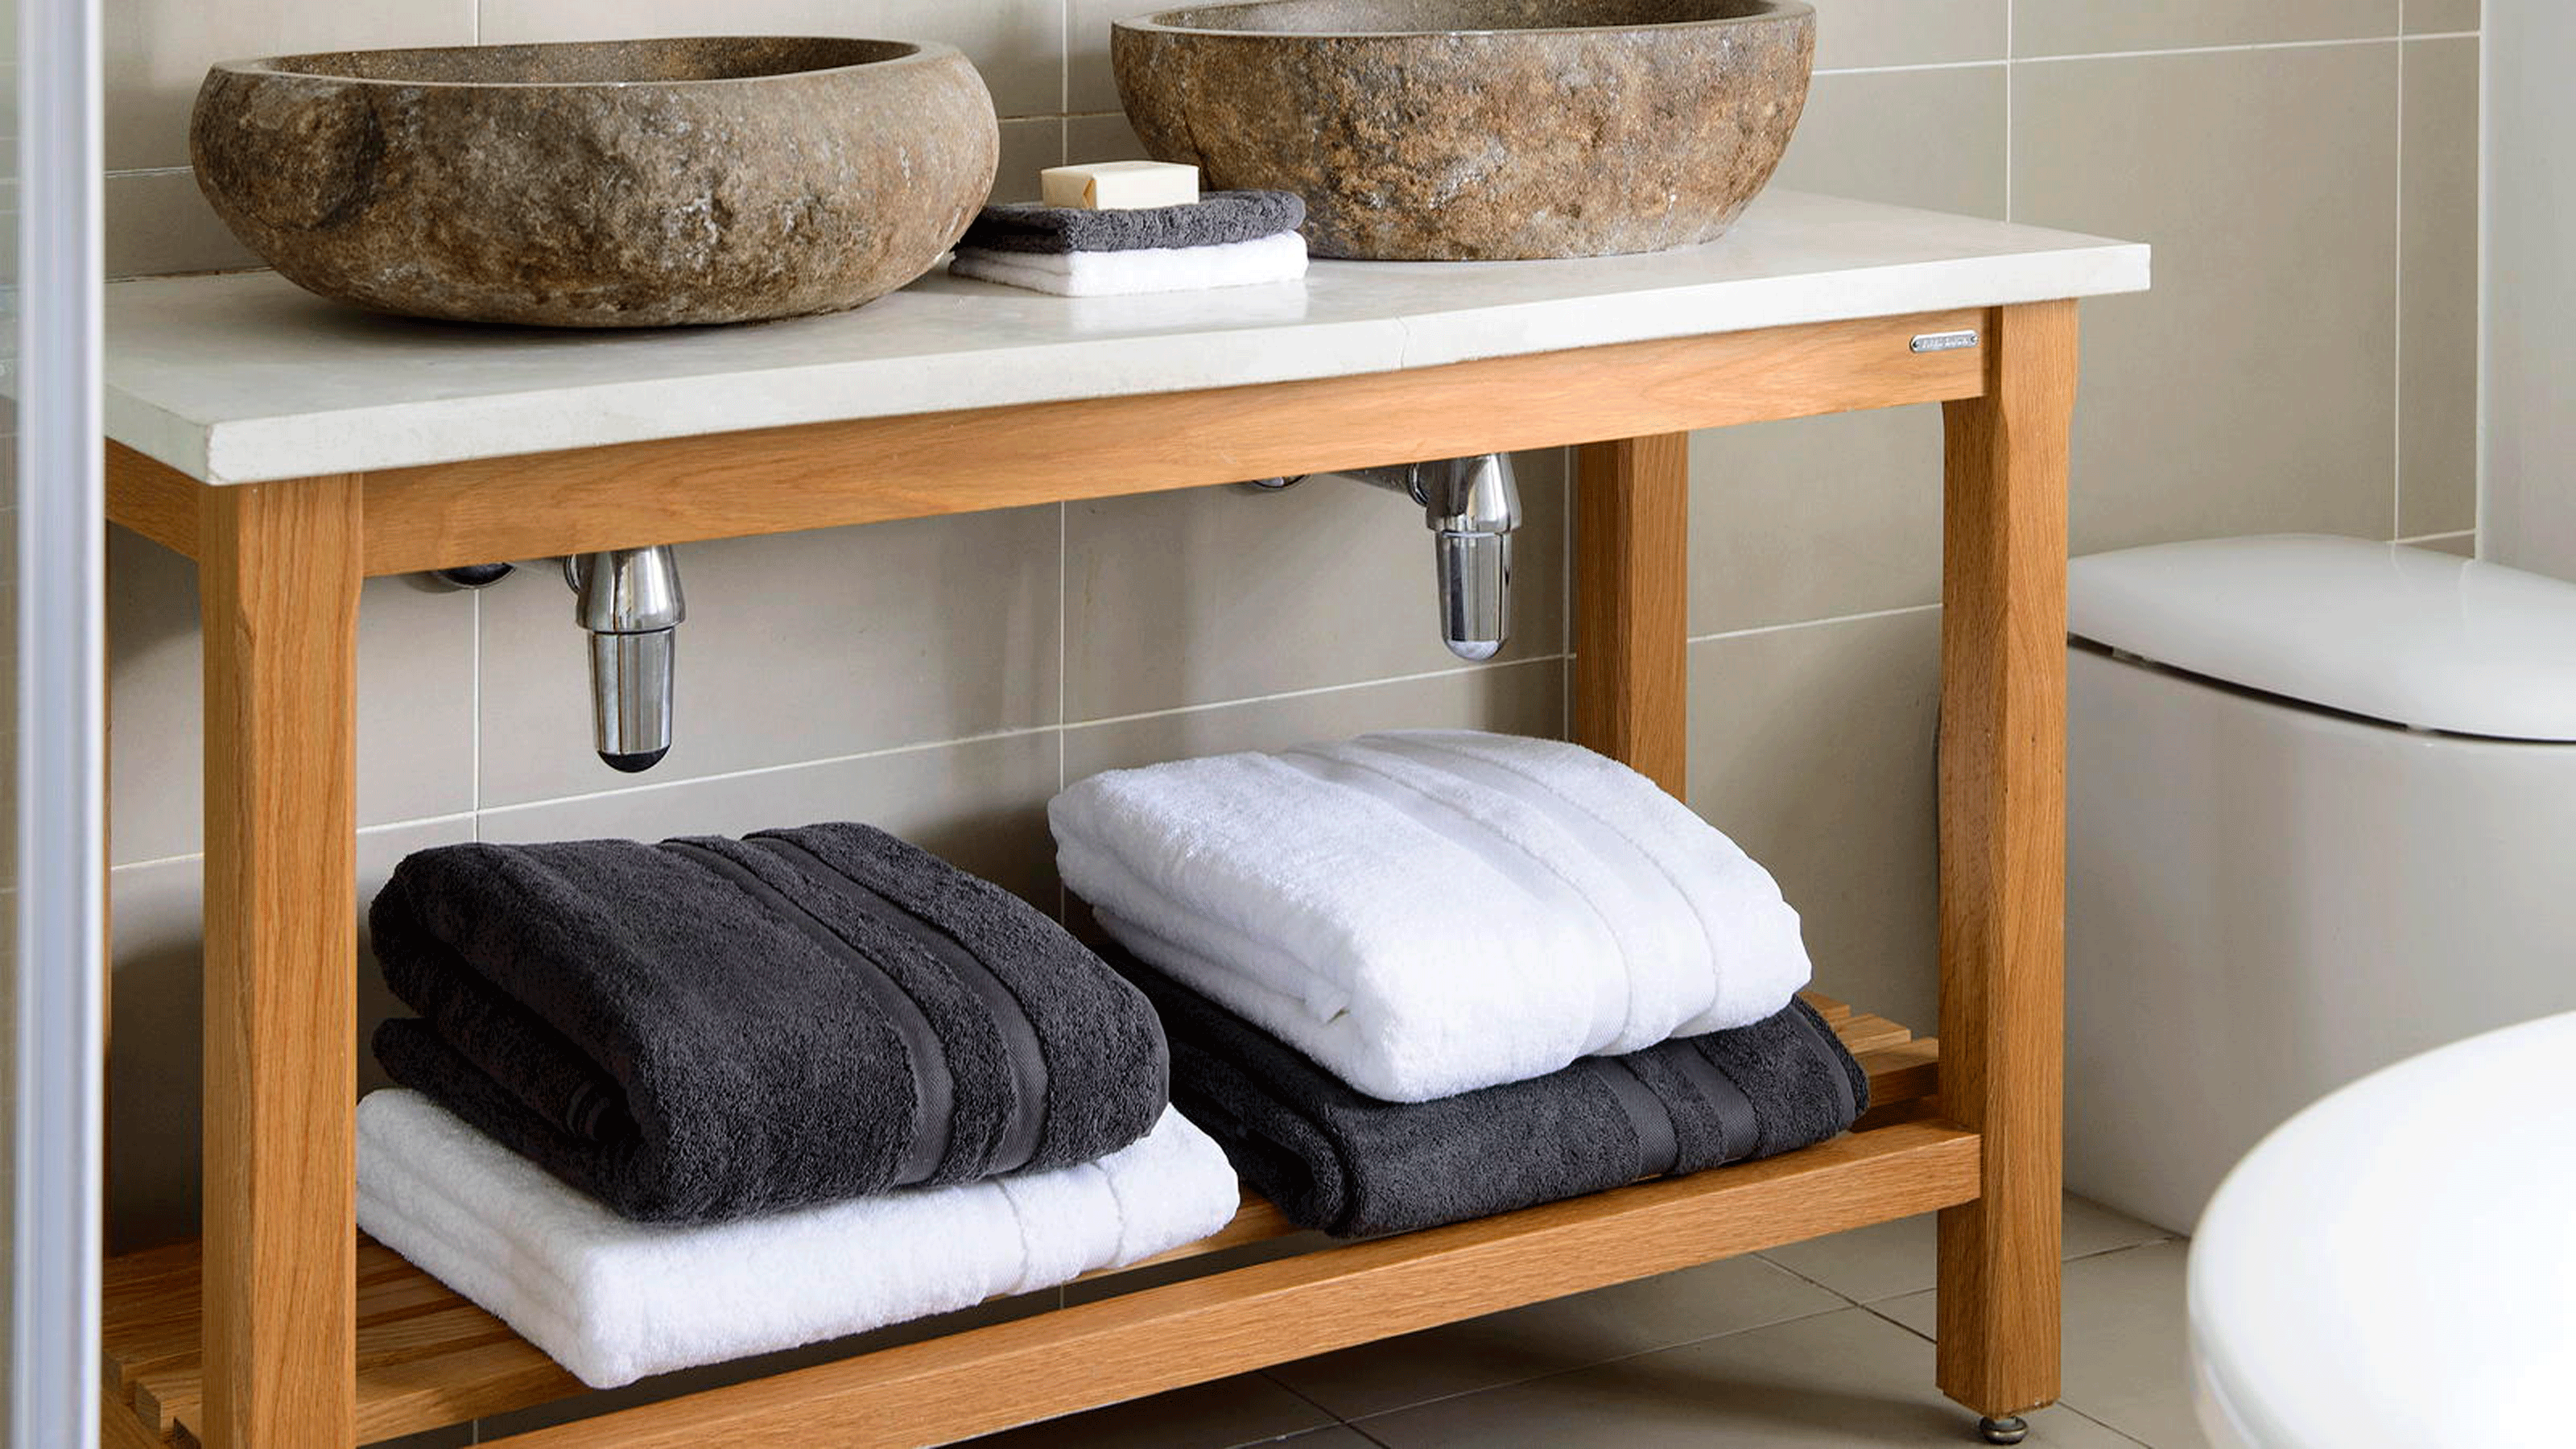 10 towel storage ideas to keep your bathroom neat and tidy | Ideal Home